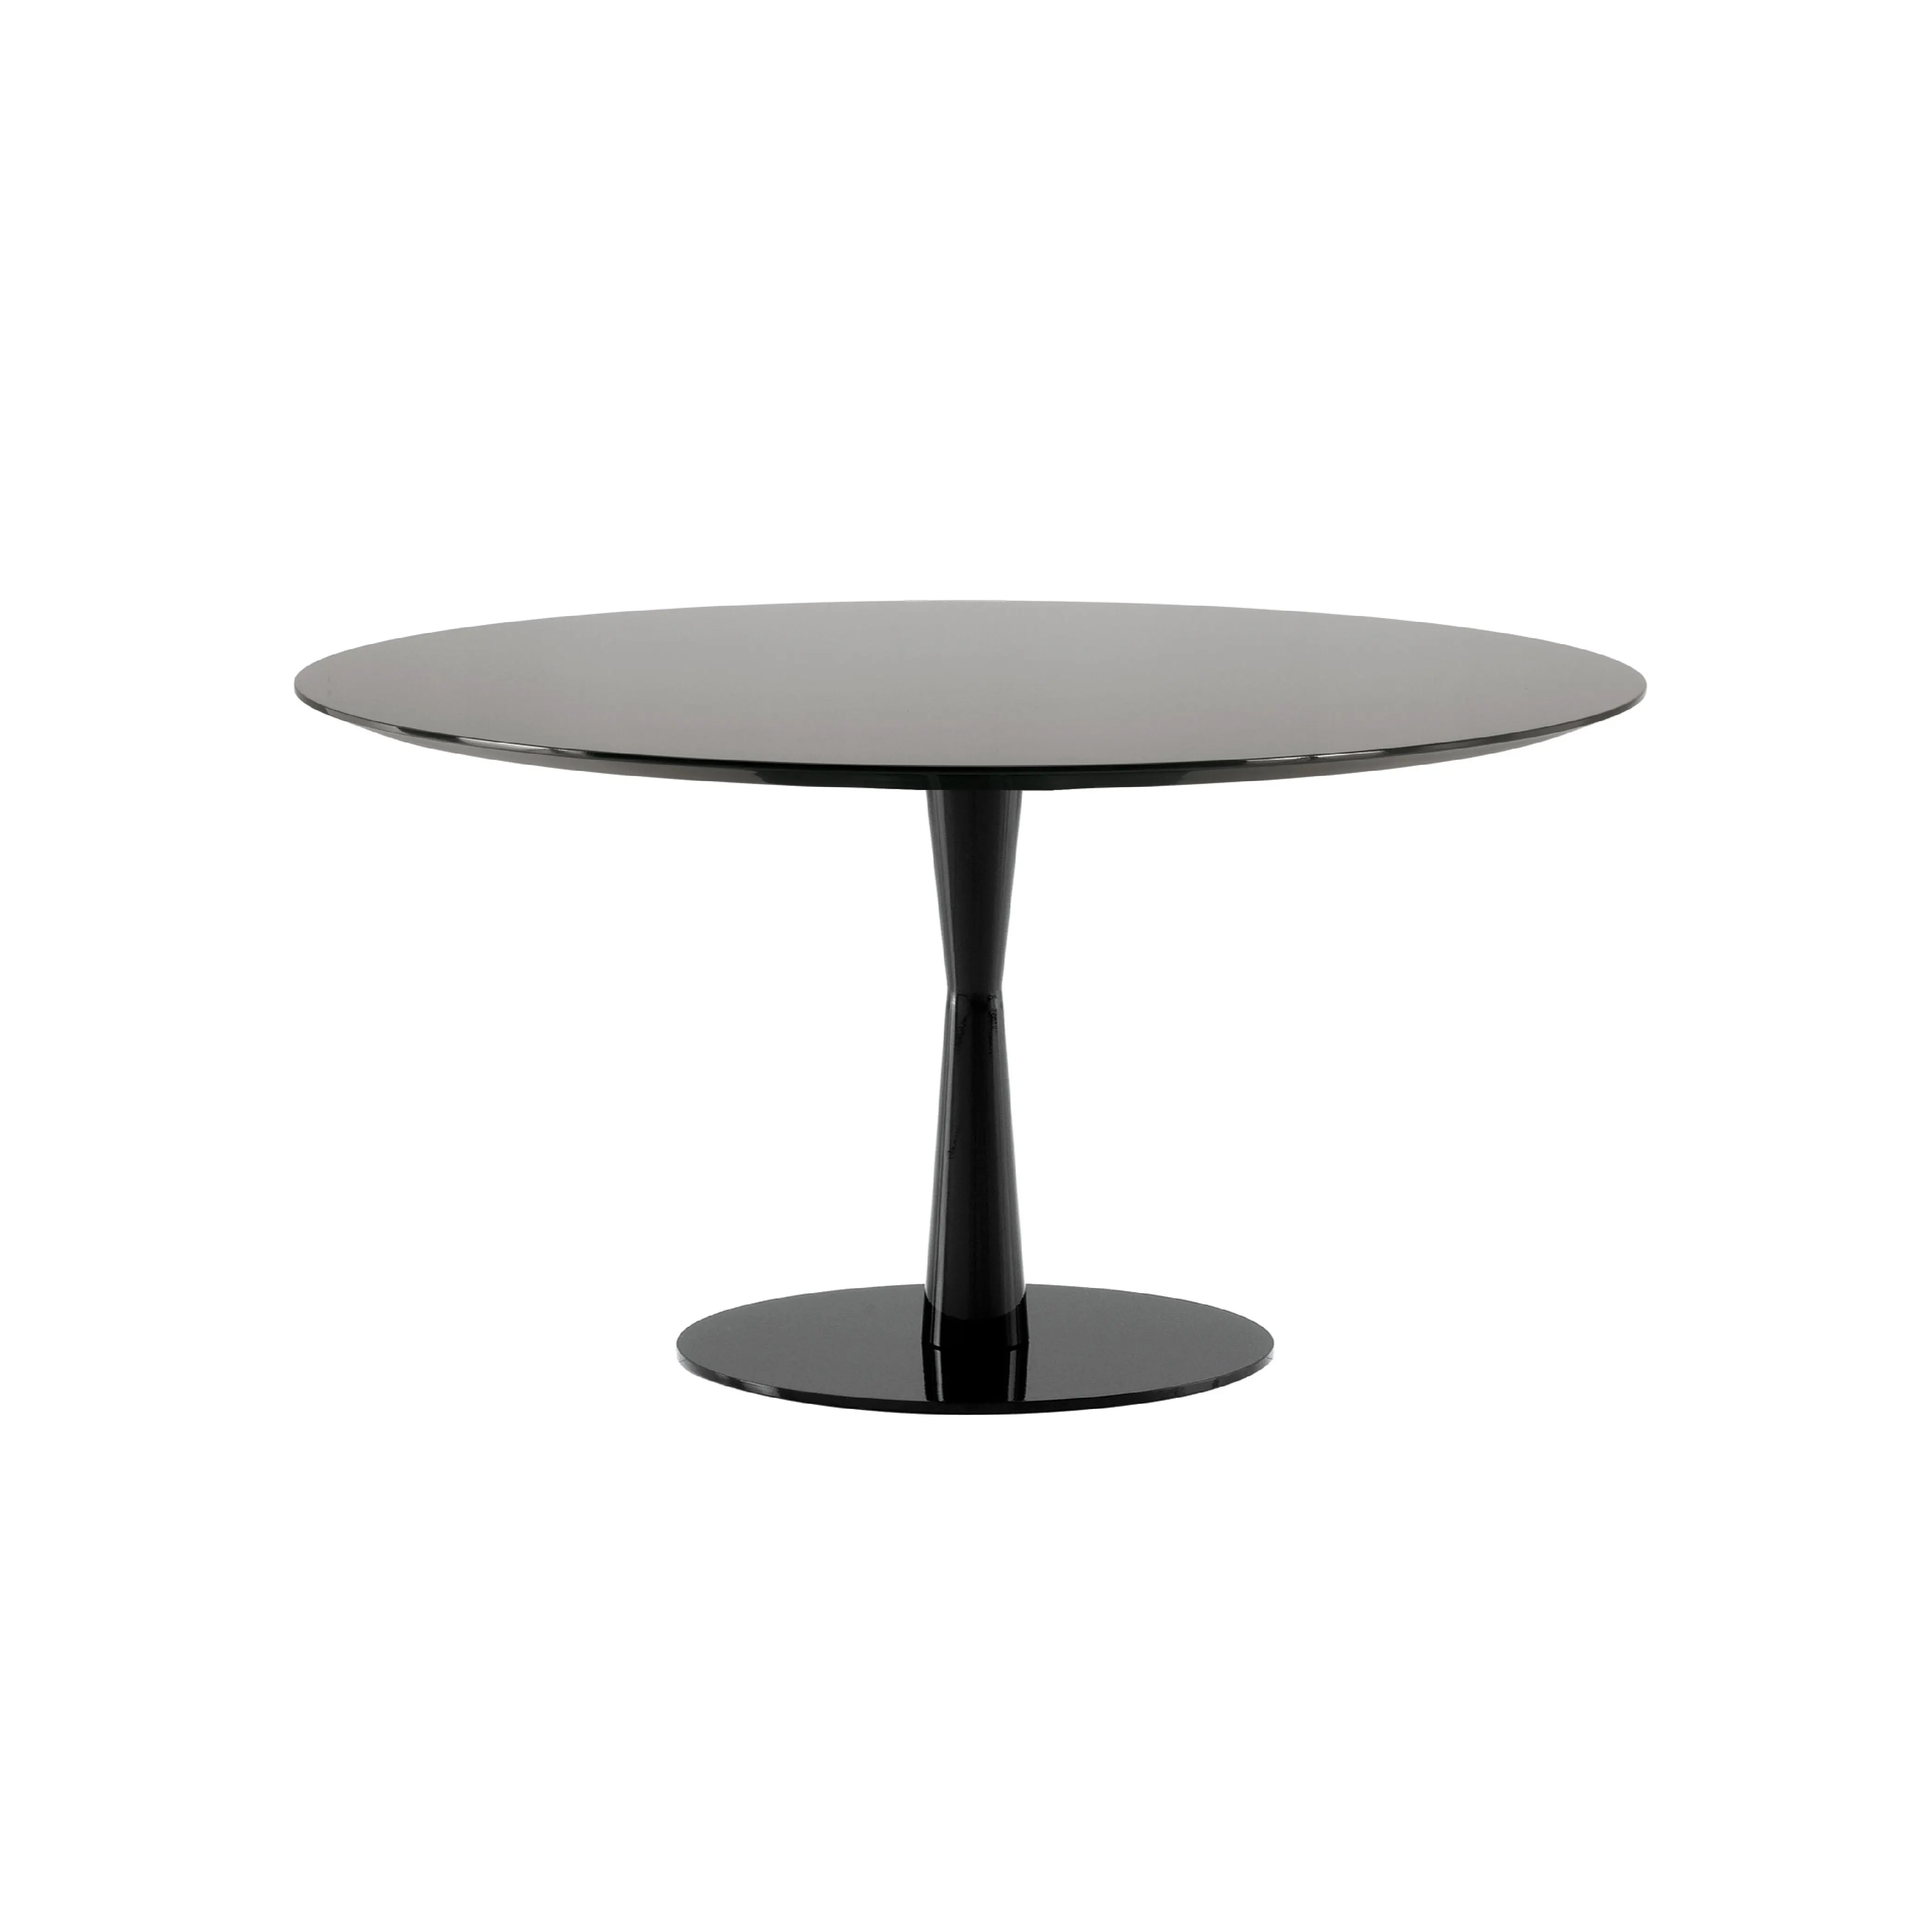 Living Furniture Customized Simple Black Small Round Dining Table Buy Plastic Circle 1 2 3 4 People Seat Small Durable Dining Table